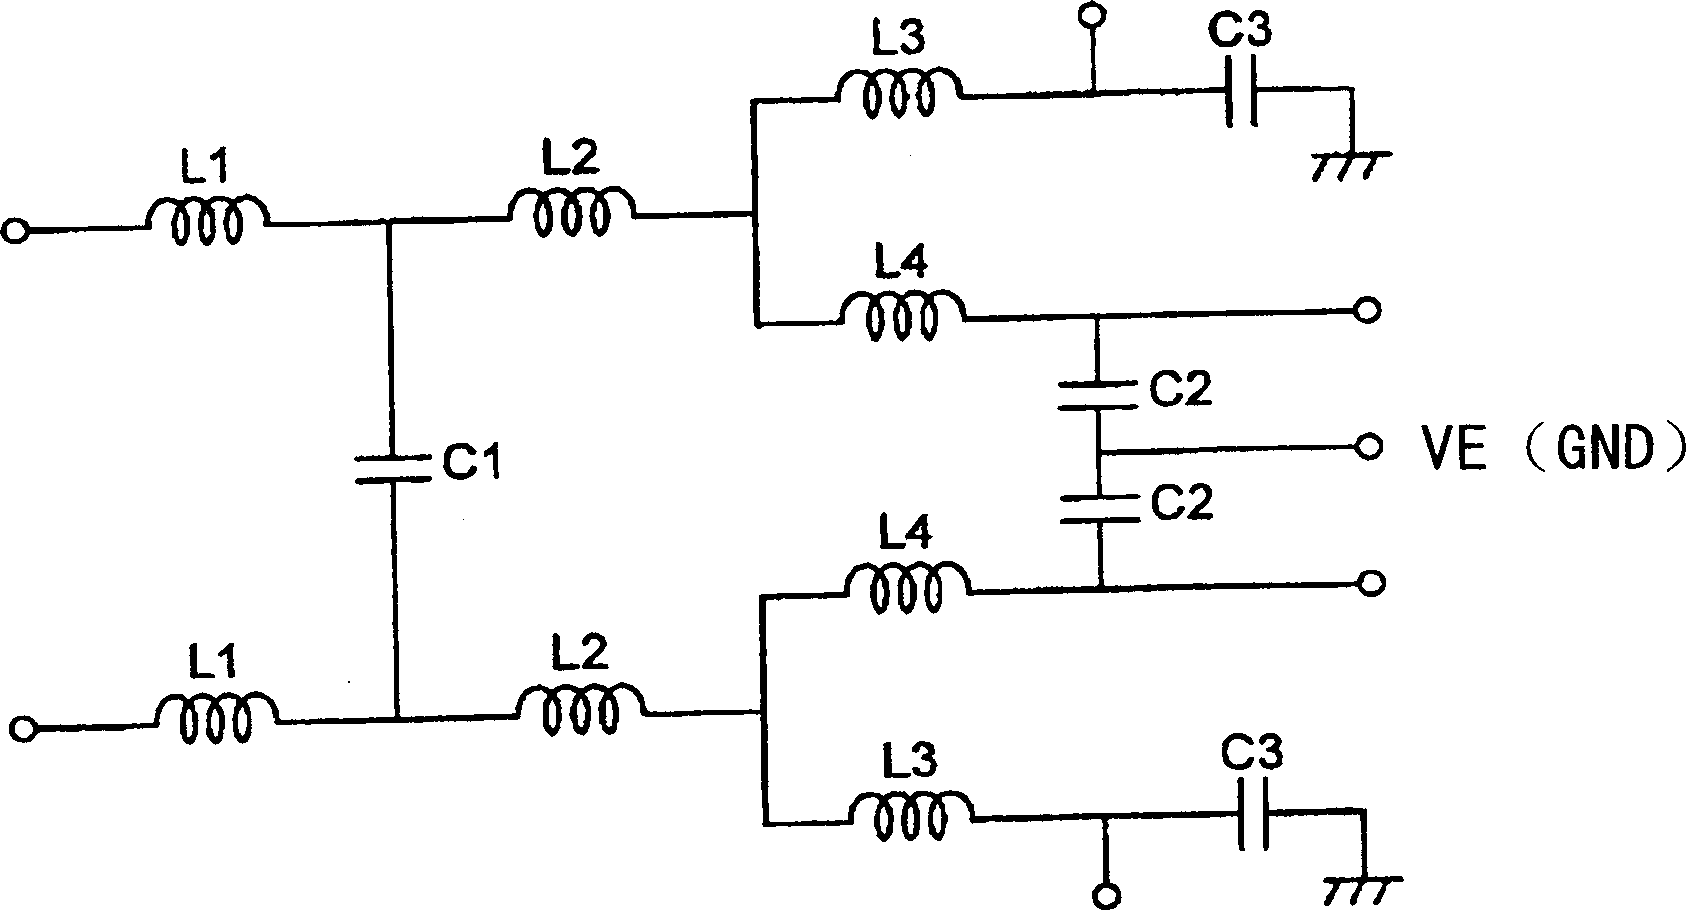 Semiconductor devices